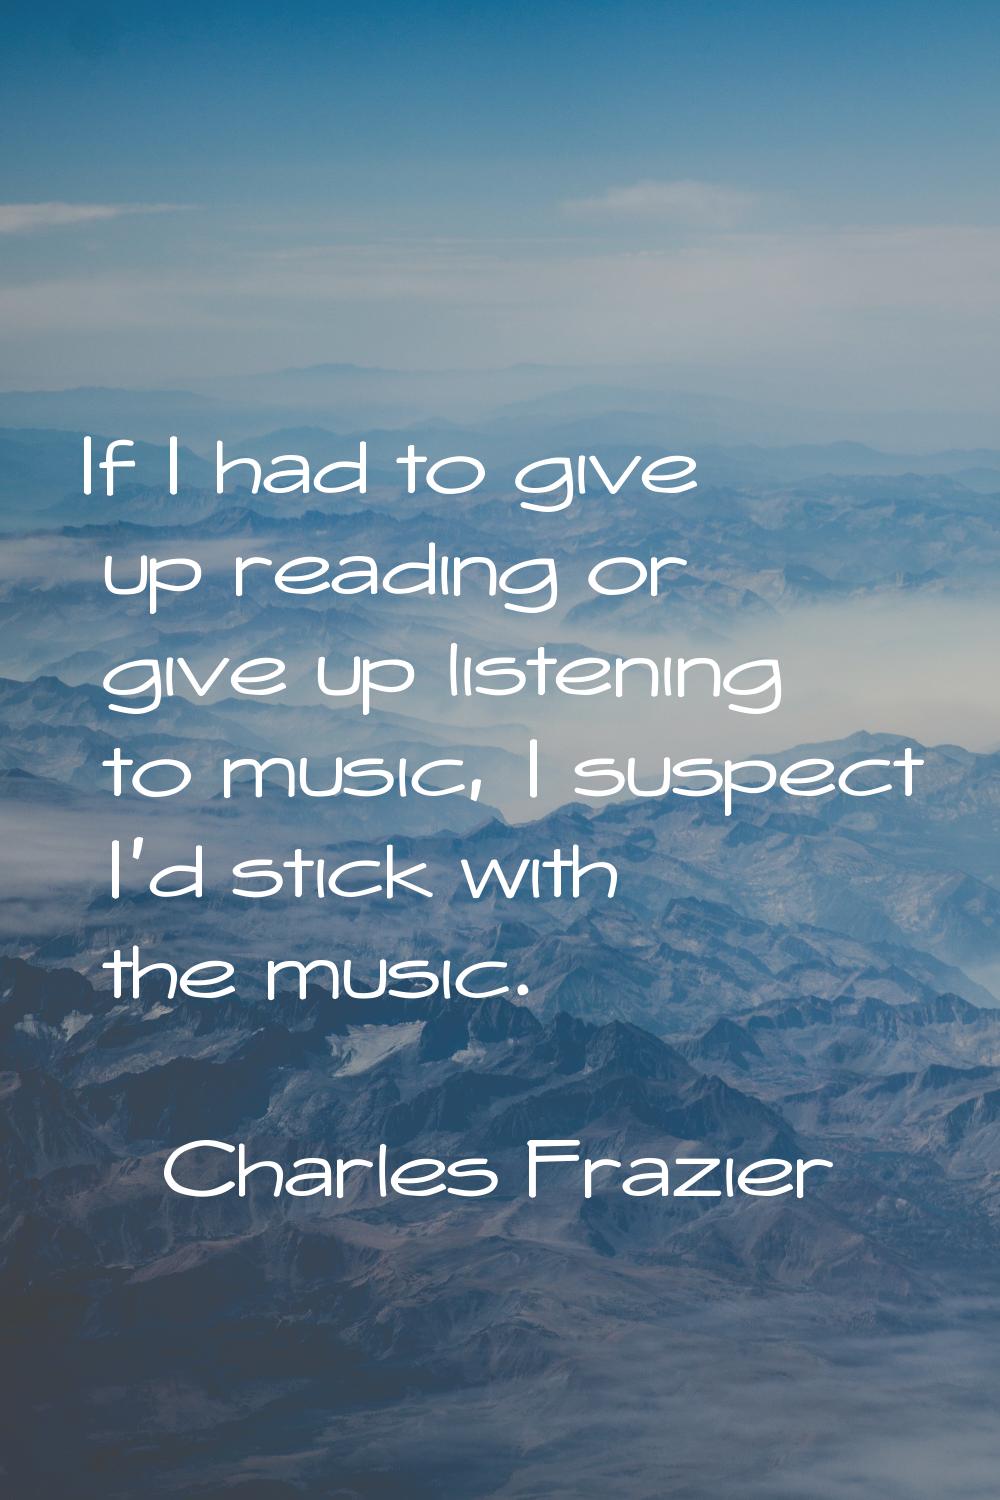 If I had to give up reading or give up listening to music, I suspect I'd stick with the music.